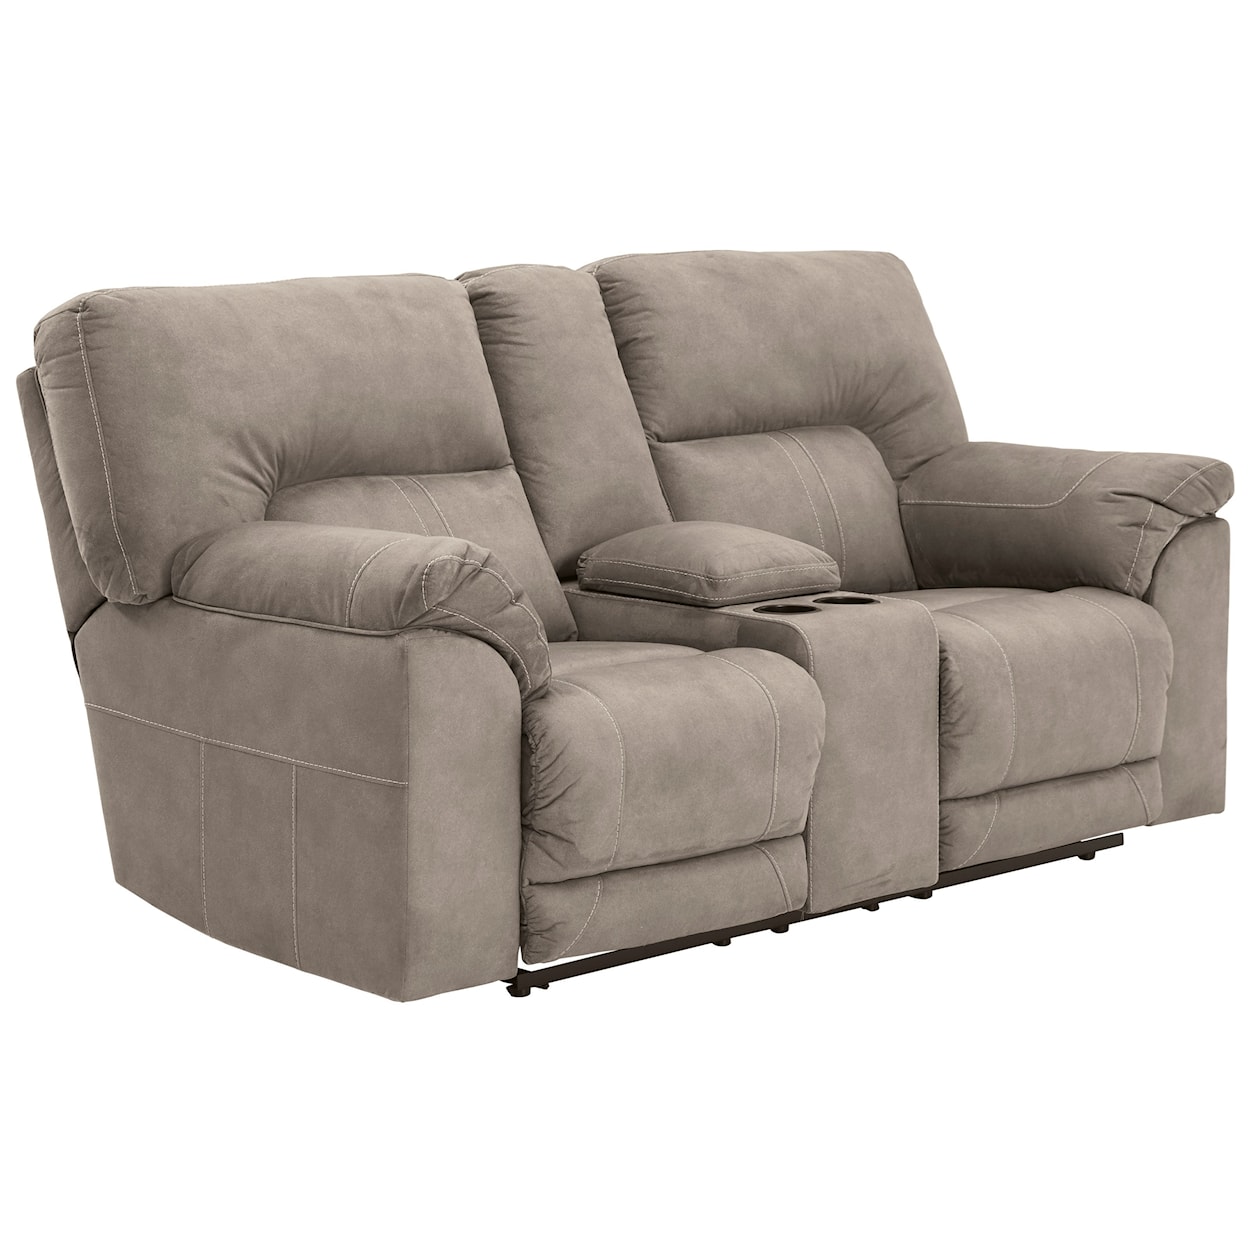 Ashley Furniture Benchcraft Cavalcade Double Reclining Loveseat with Console